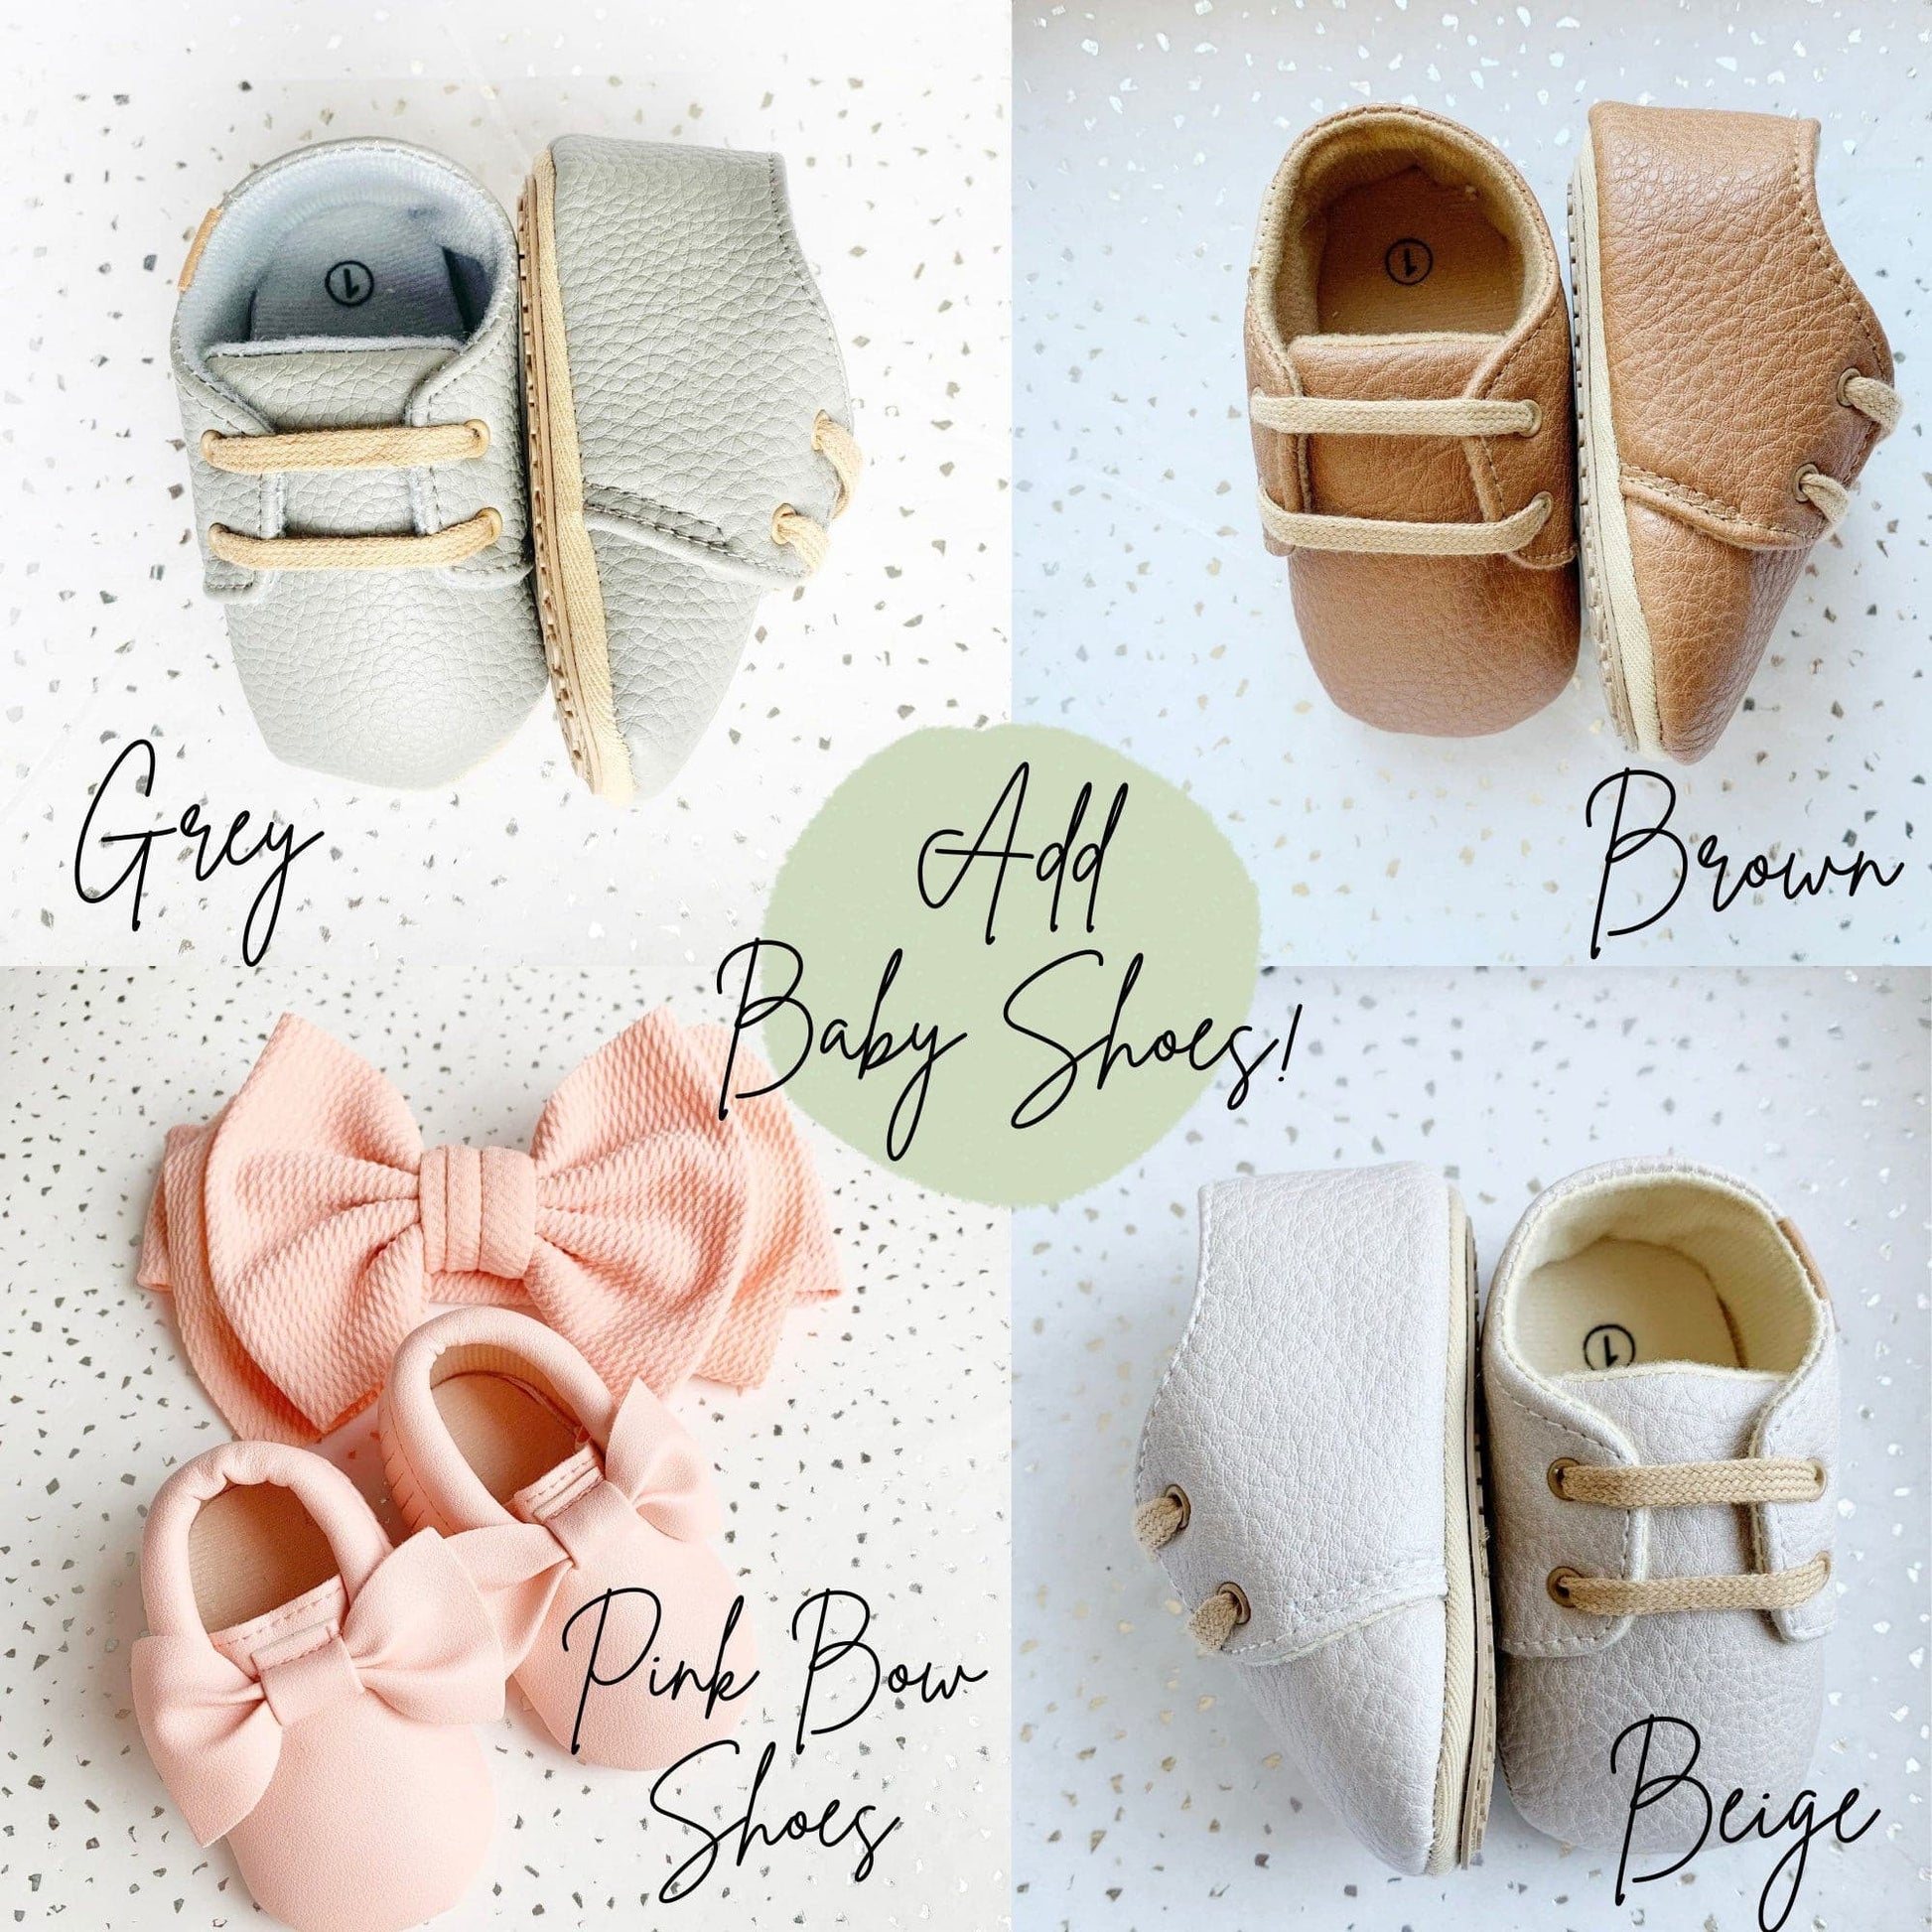 Grey Baby Shoes with laces, Brown Baby Shoes with laces, Beige Baby Shoes with laces, Pink Baby Shoes with bow, Pink Baby Bow